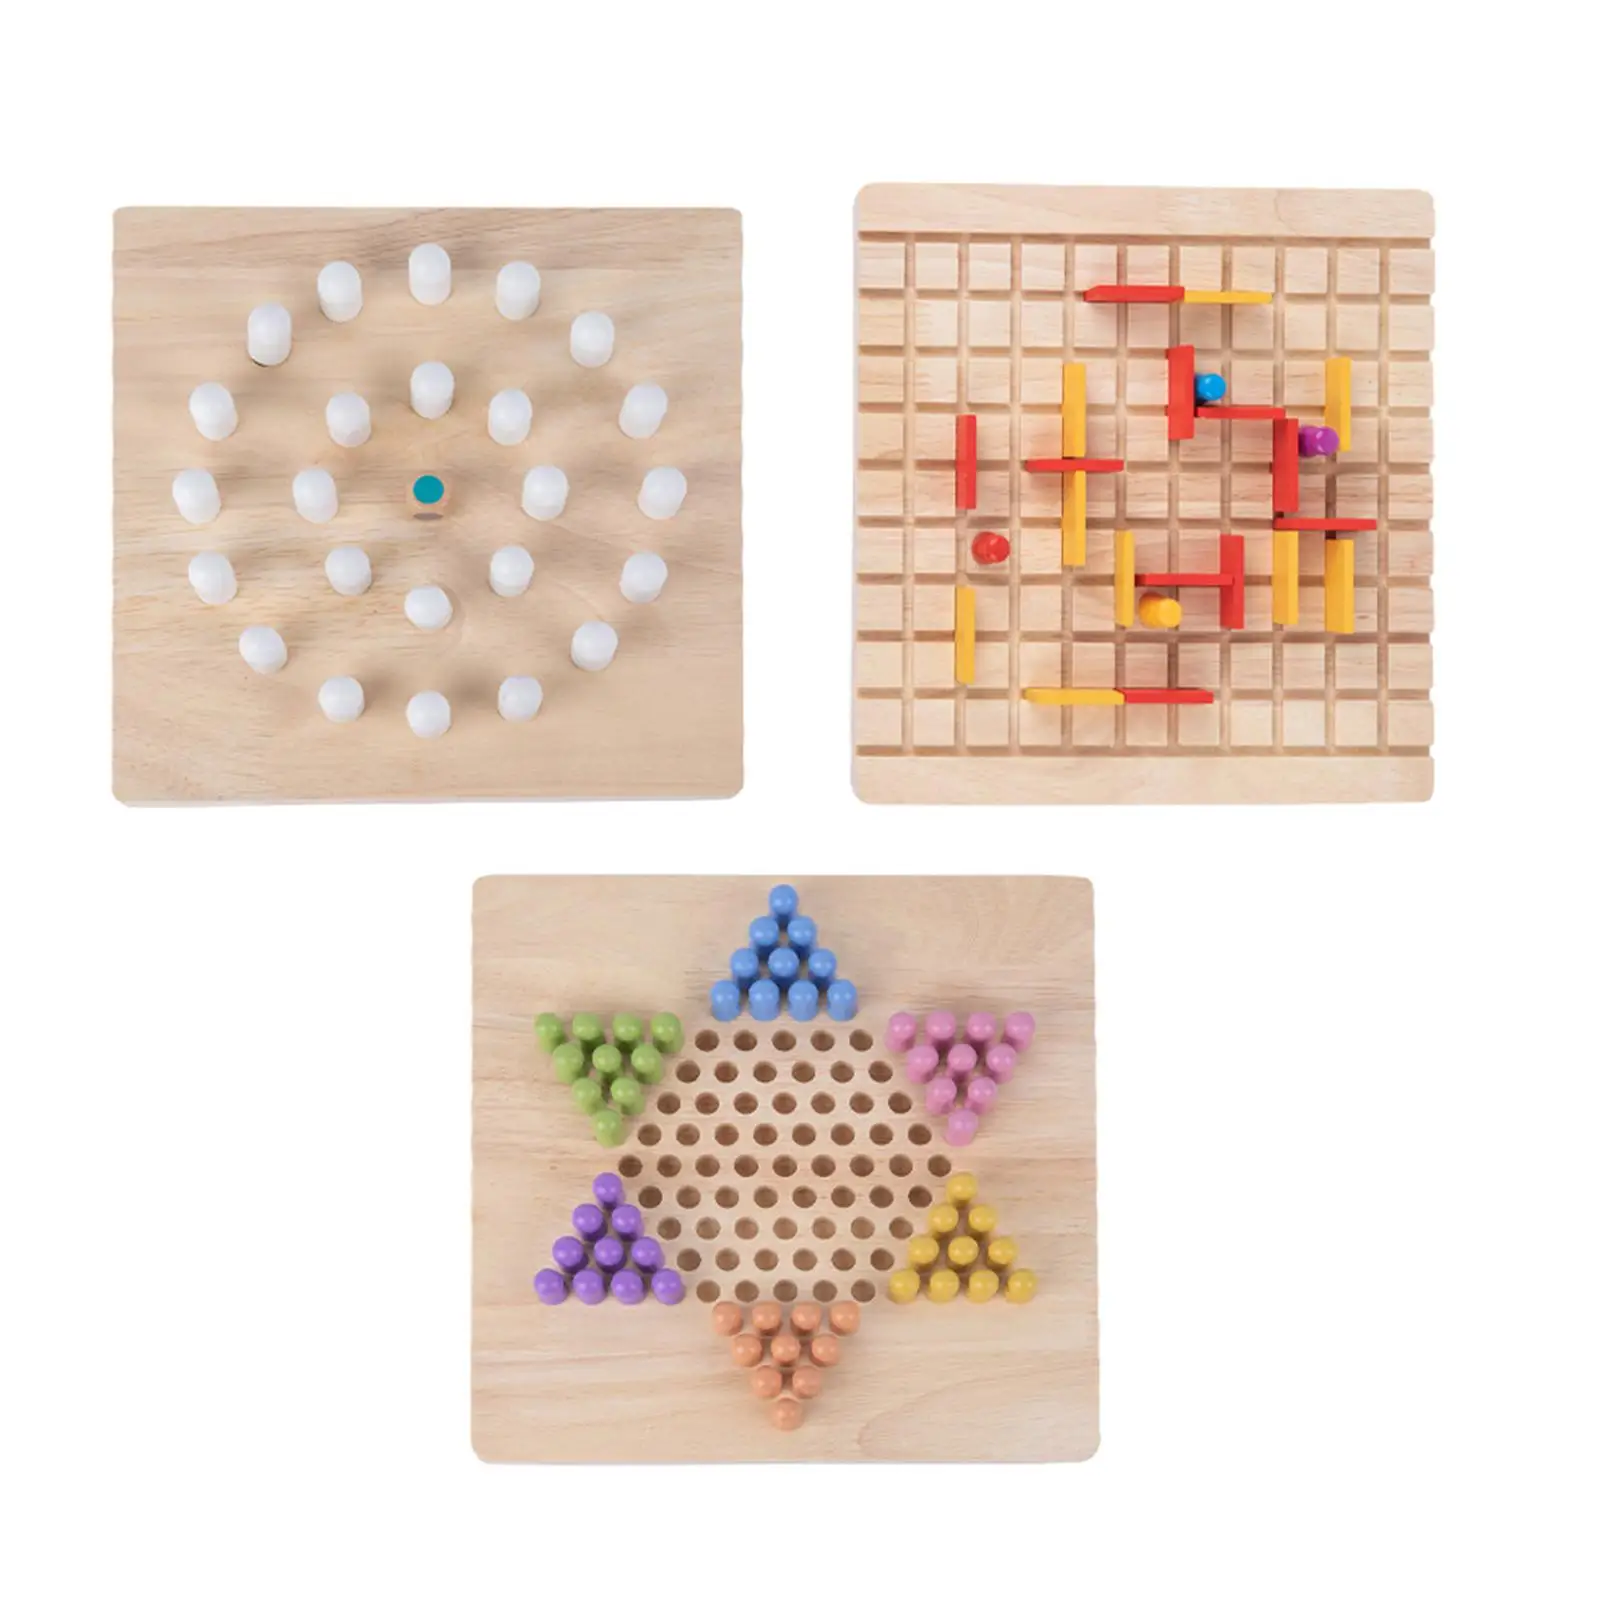 Wood Strategy Family Game Portable Learning Wooden Board Game Pegs Set for Activity Preschool Social Skills Gathering Birthday